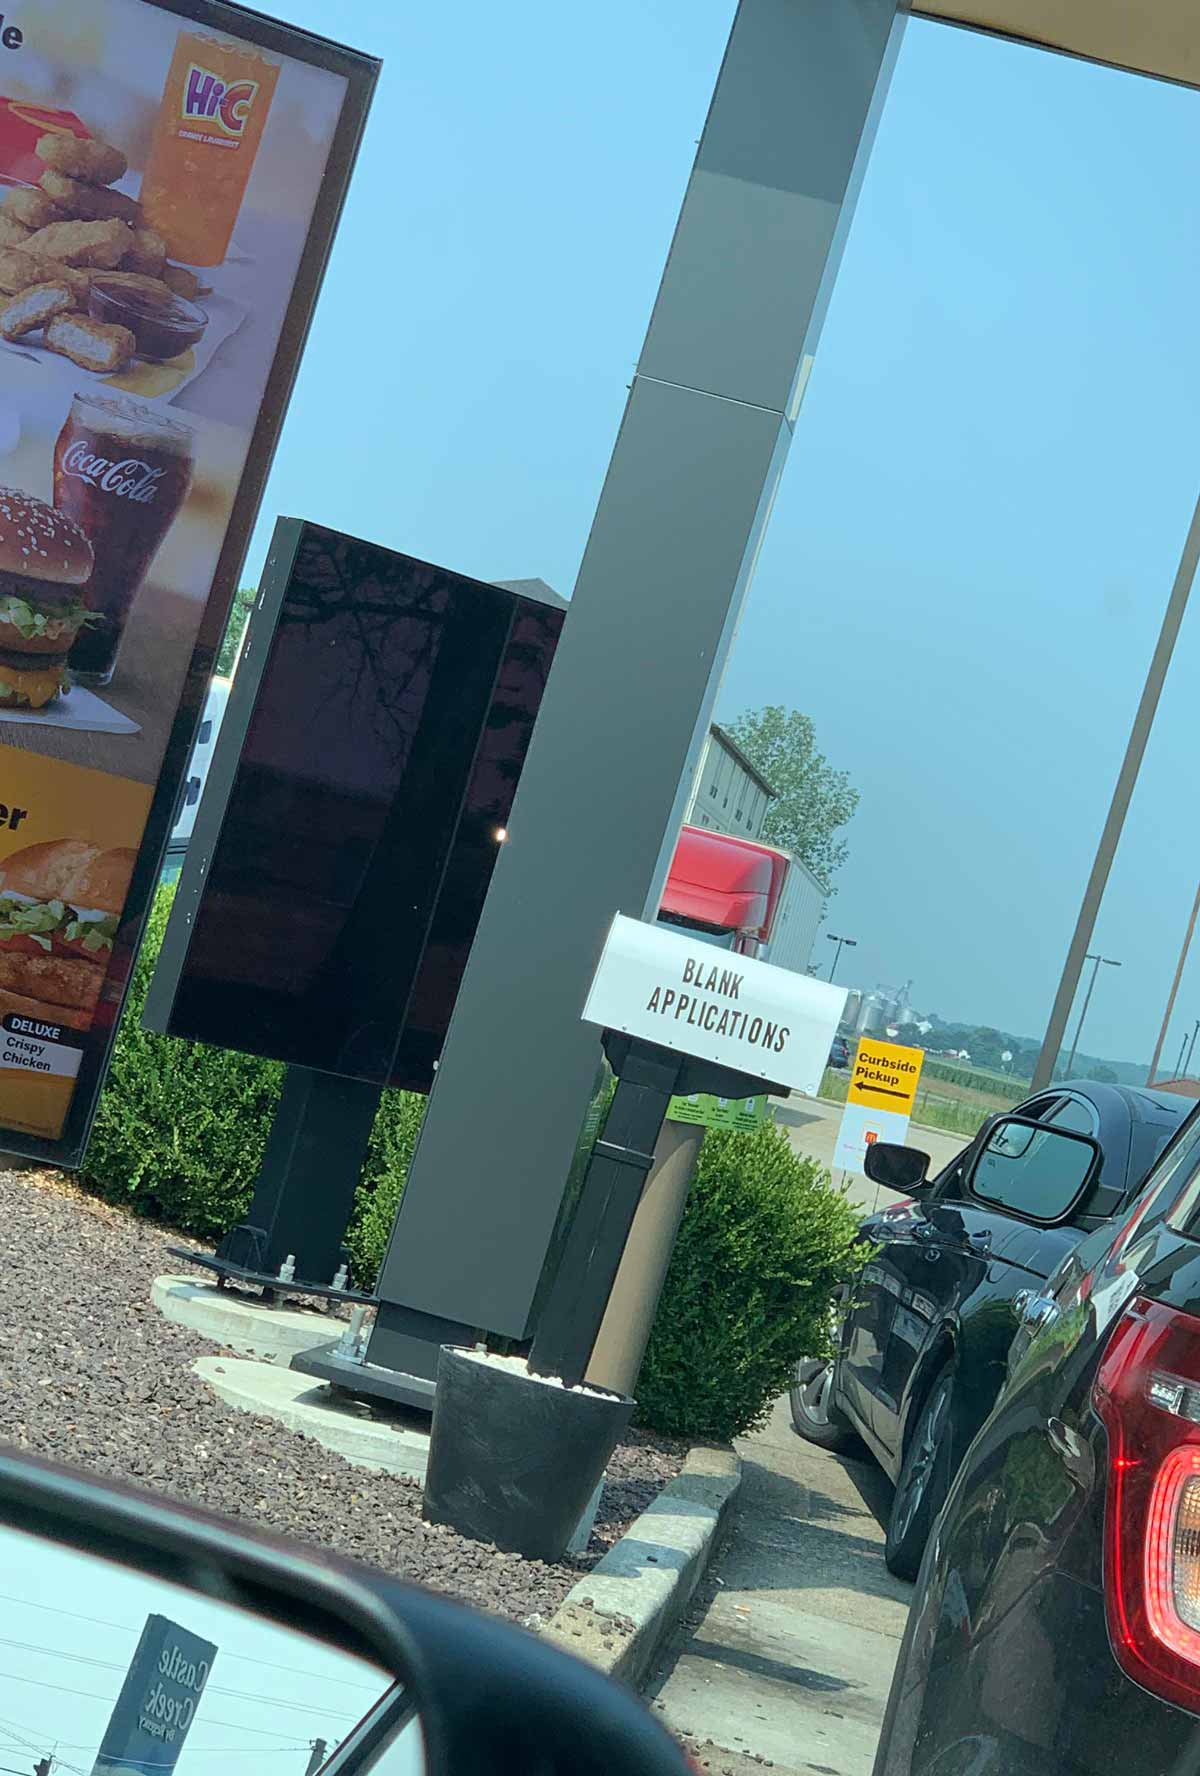 The local McDonald's has been getting pretty desperate lately